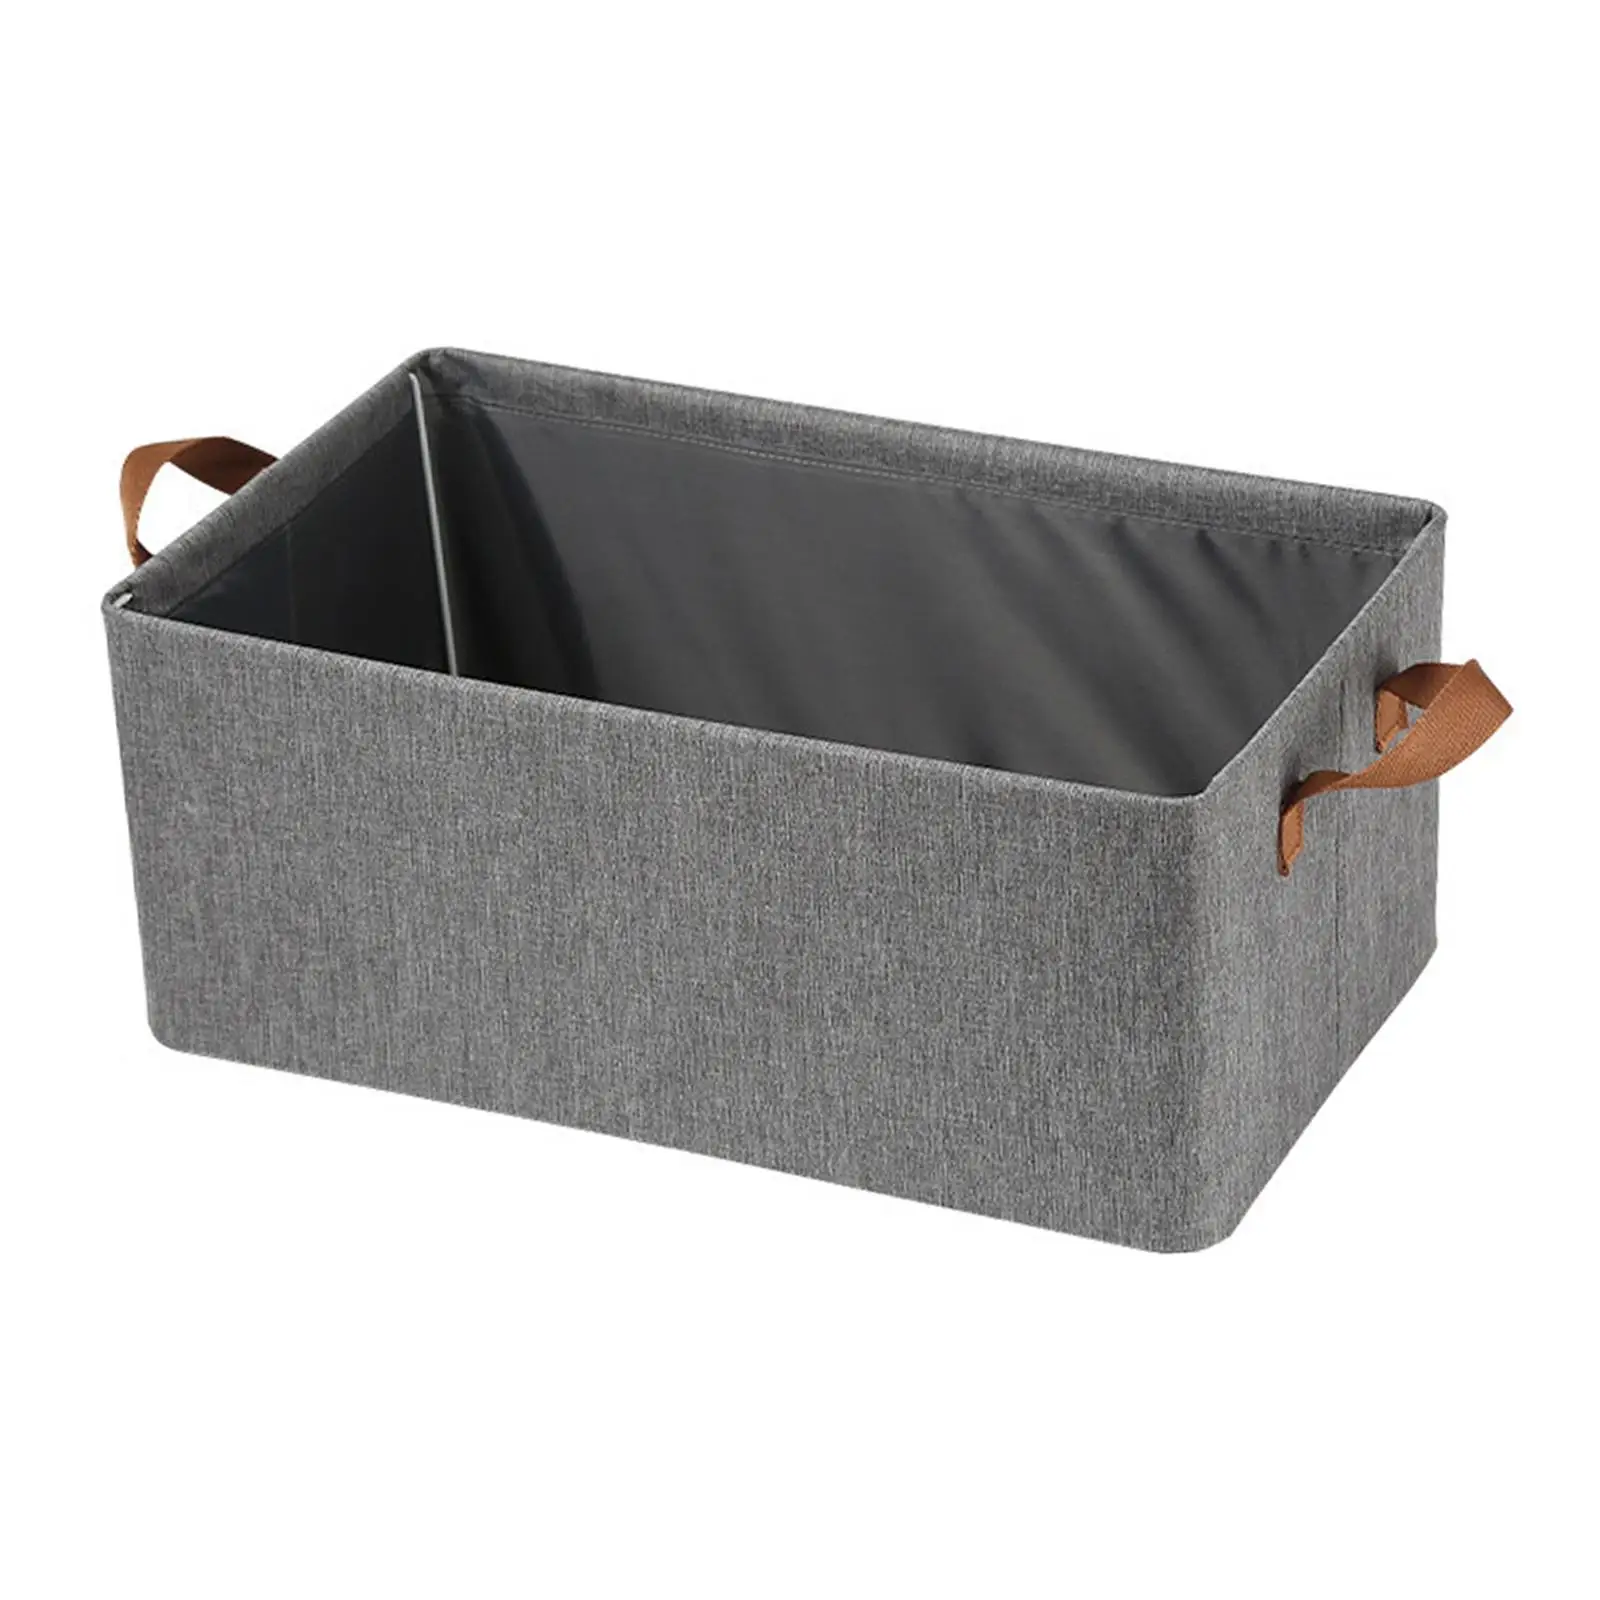 Portable Handy Dirty Clothes Storage Basket Organizer with Handles Folding Storage Basket for Home Office Clothes Closet Shelves